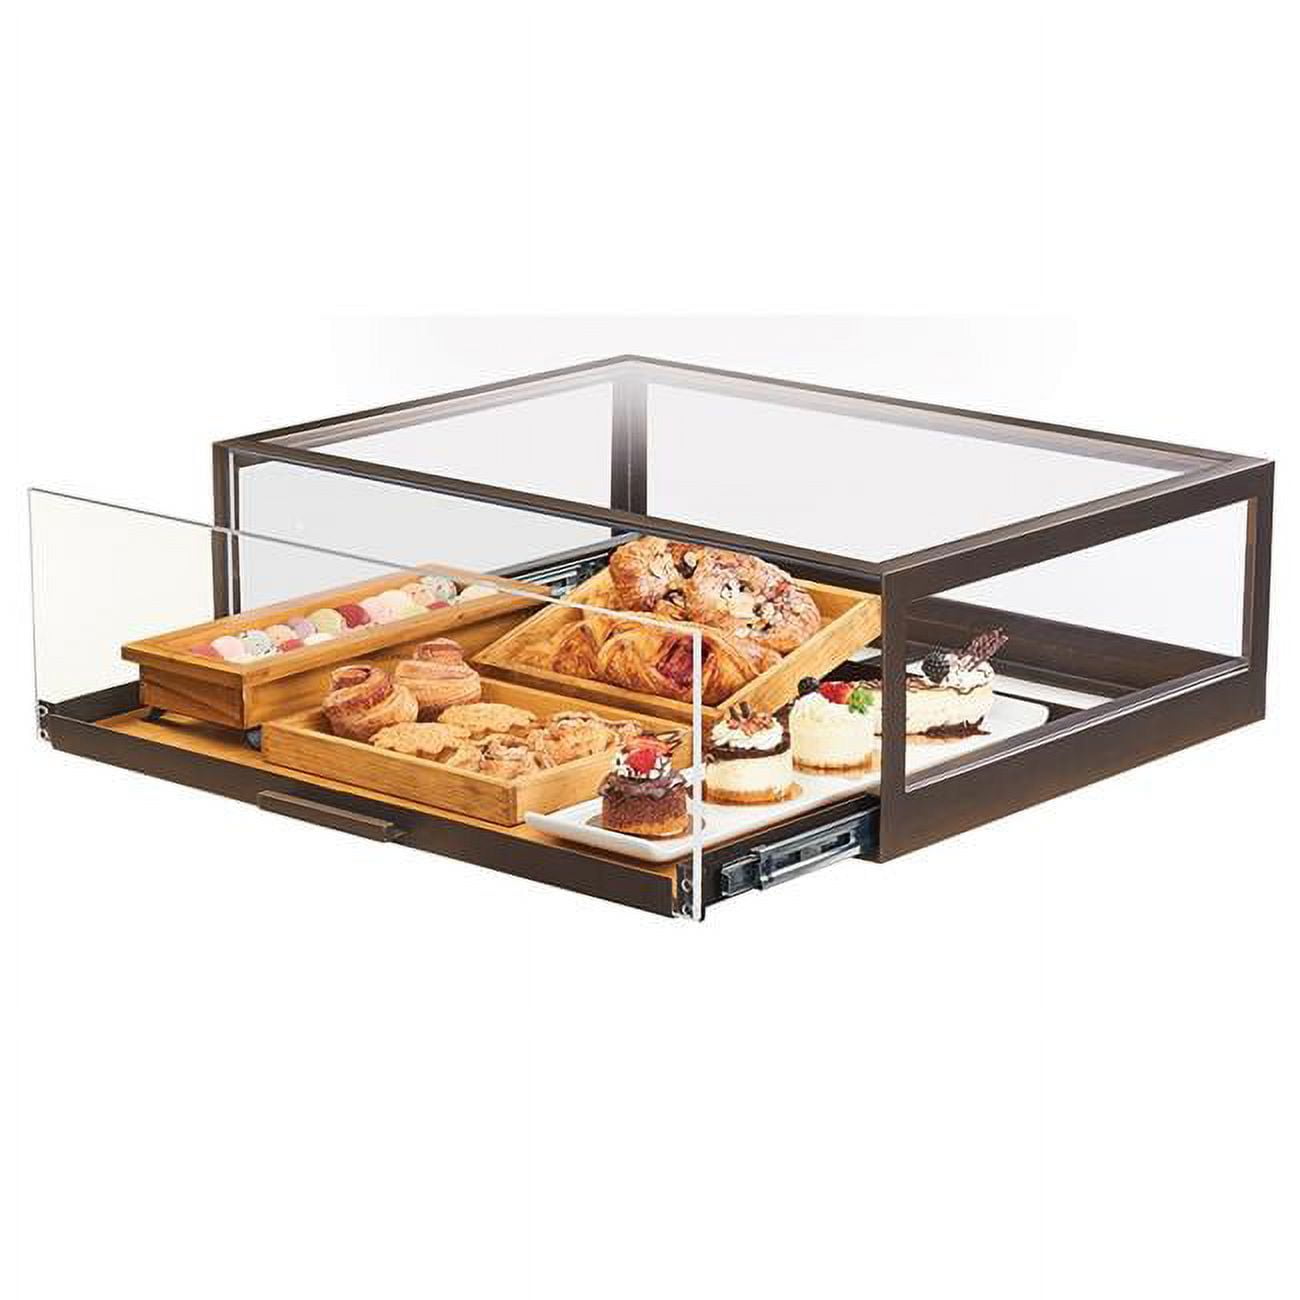 Picture of Cal Mil 3694-84 Sierra Pastry Drawer - 48 x 24 x 10 in.